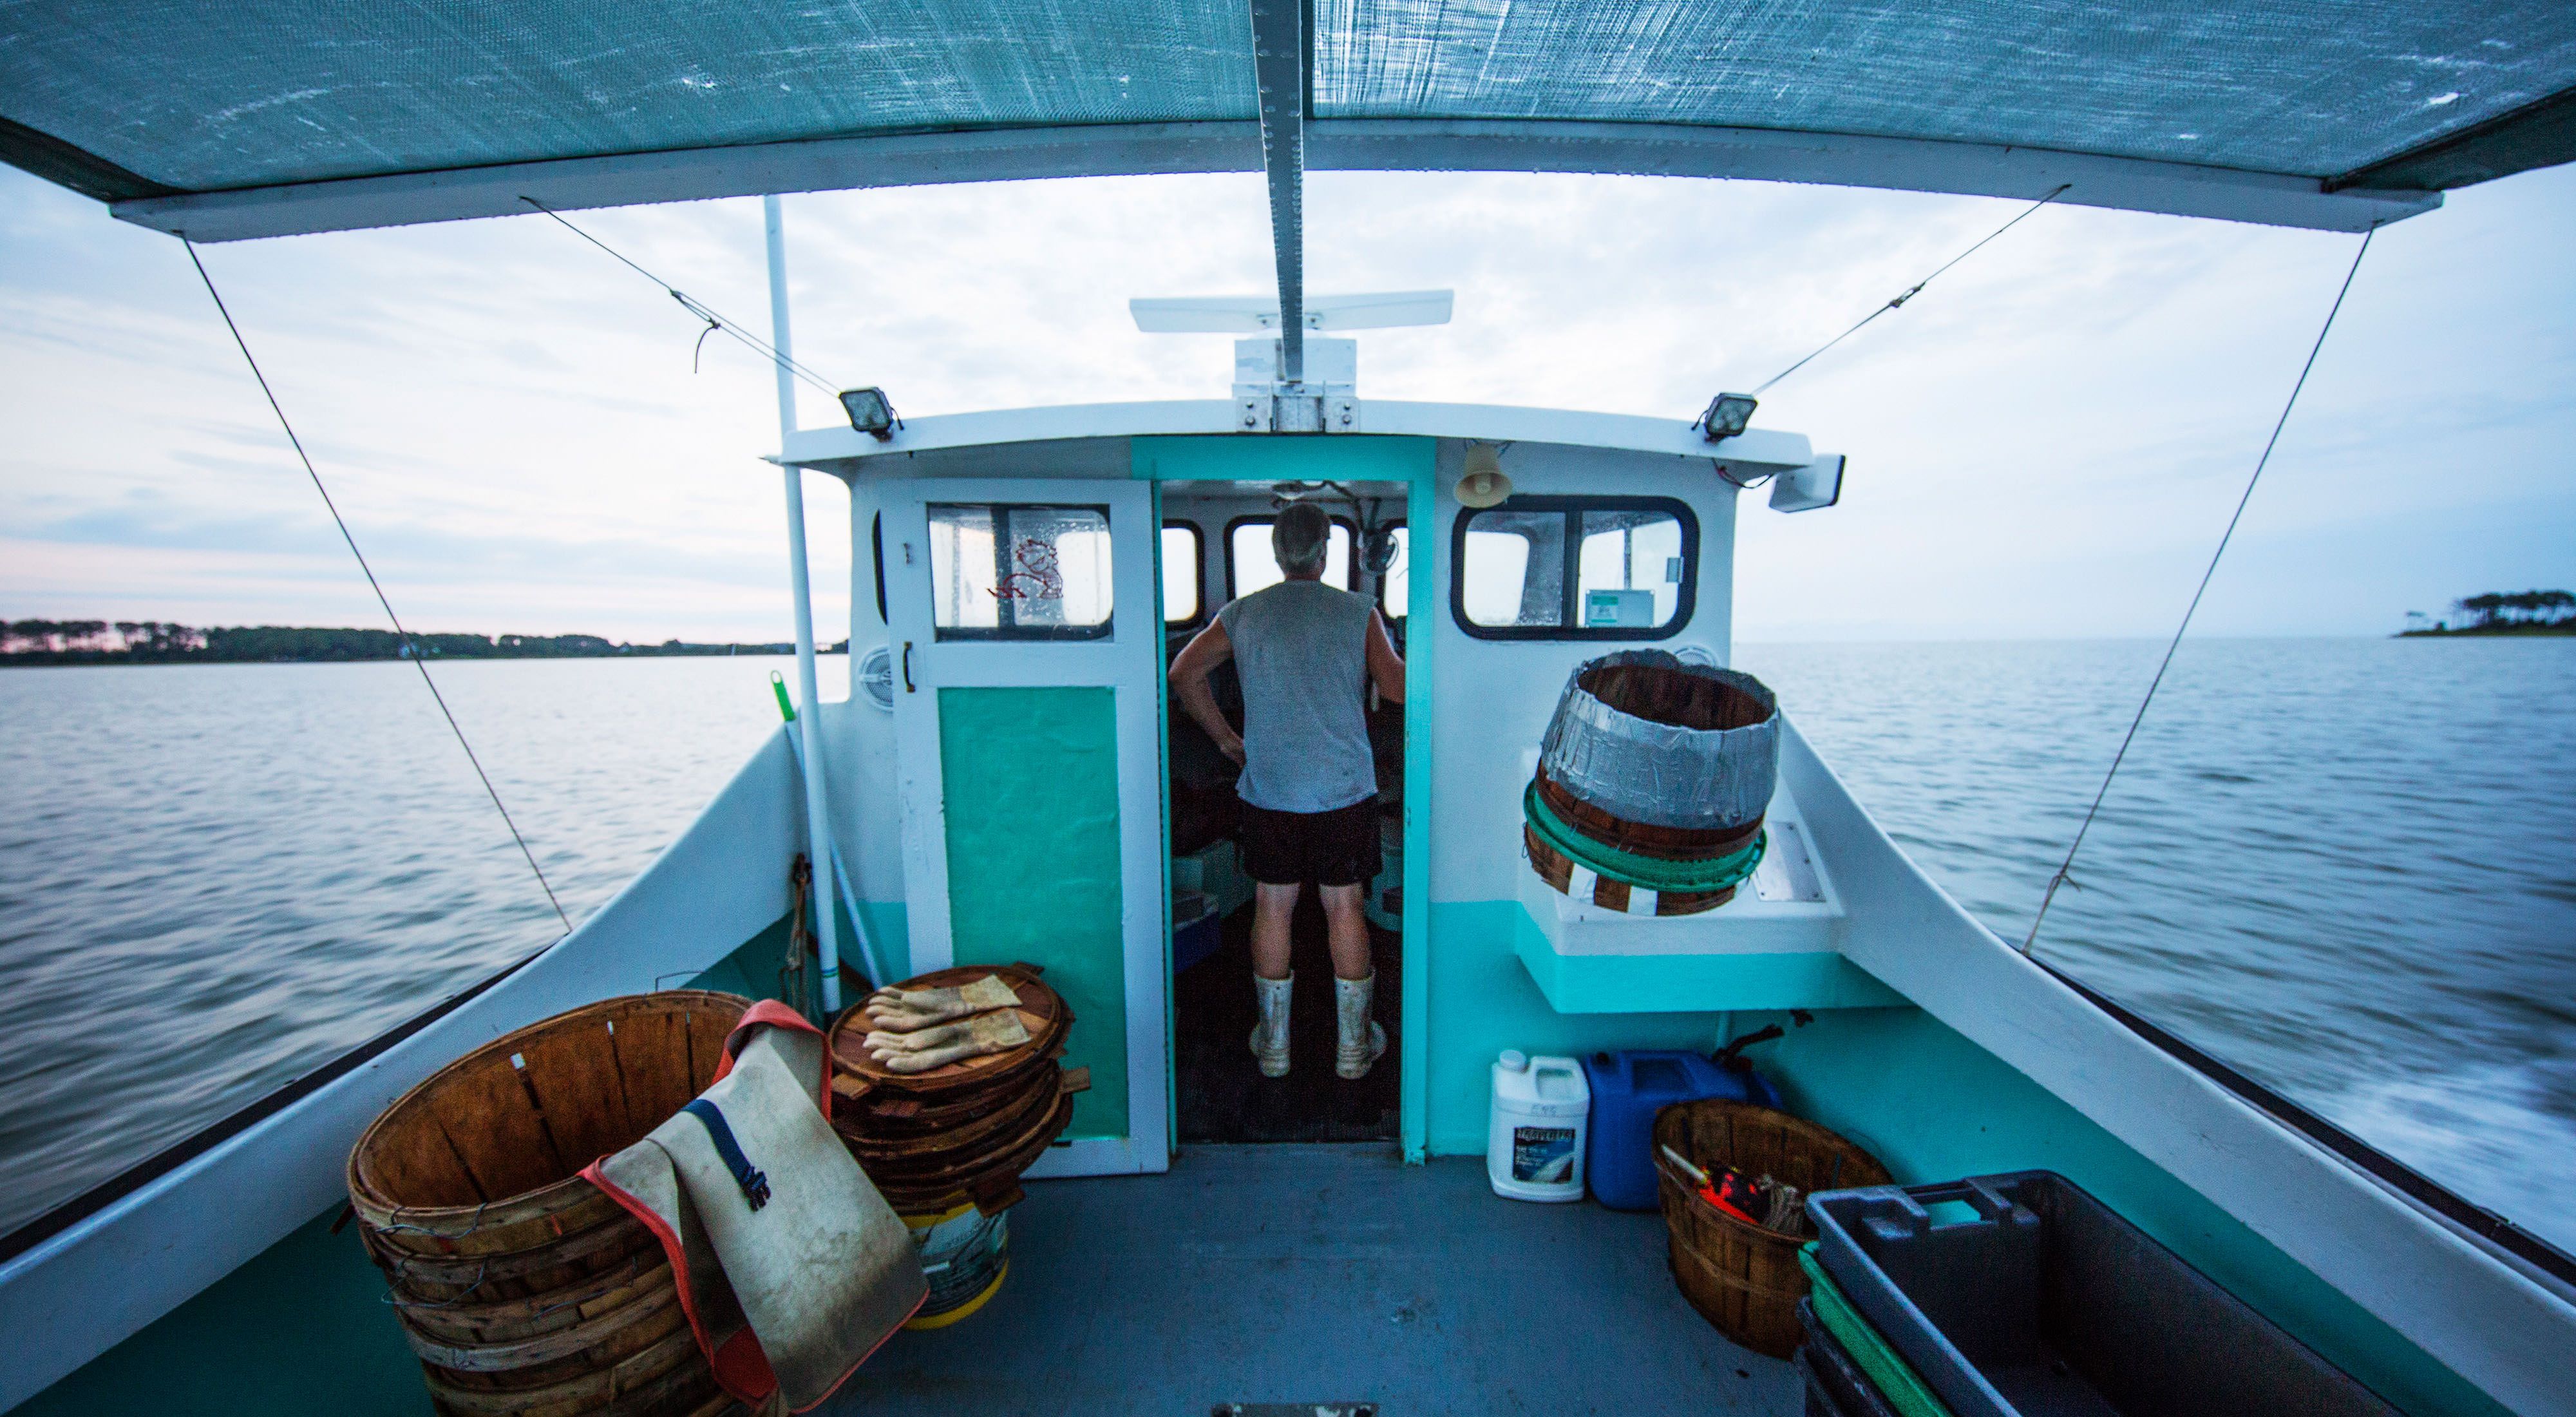 A man stands in the wheel house of a crab boat.